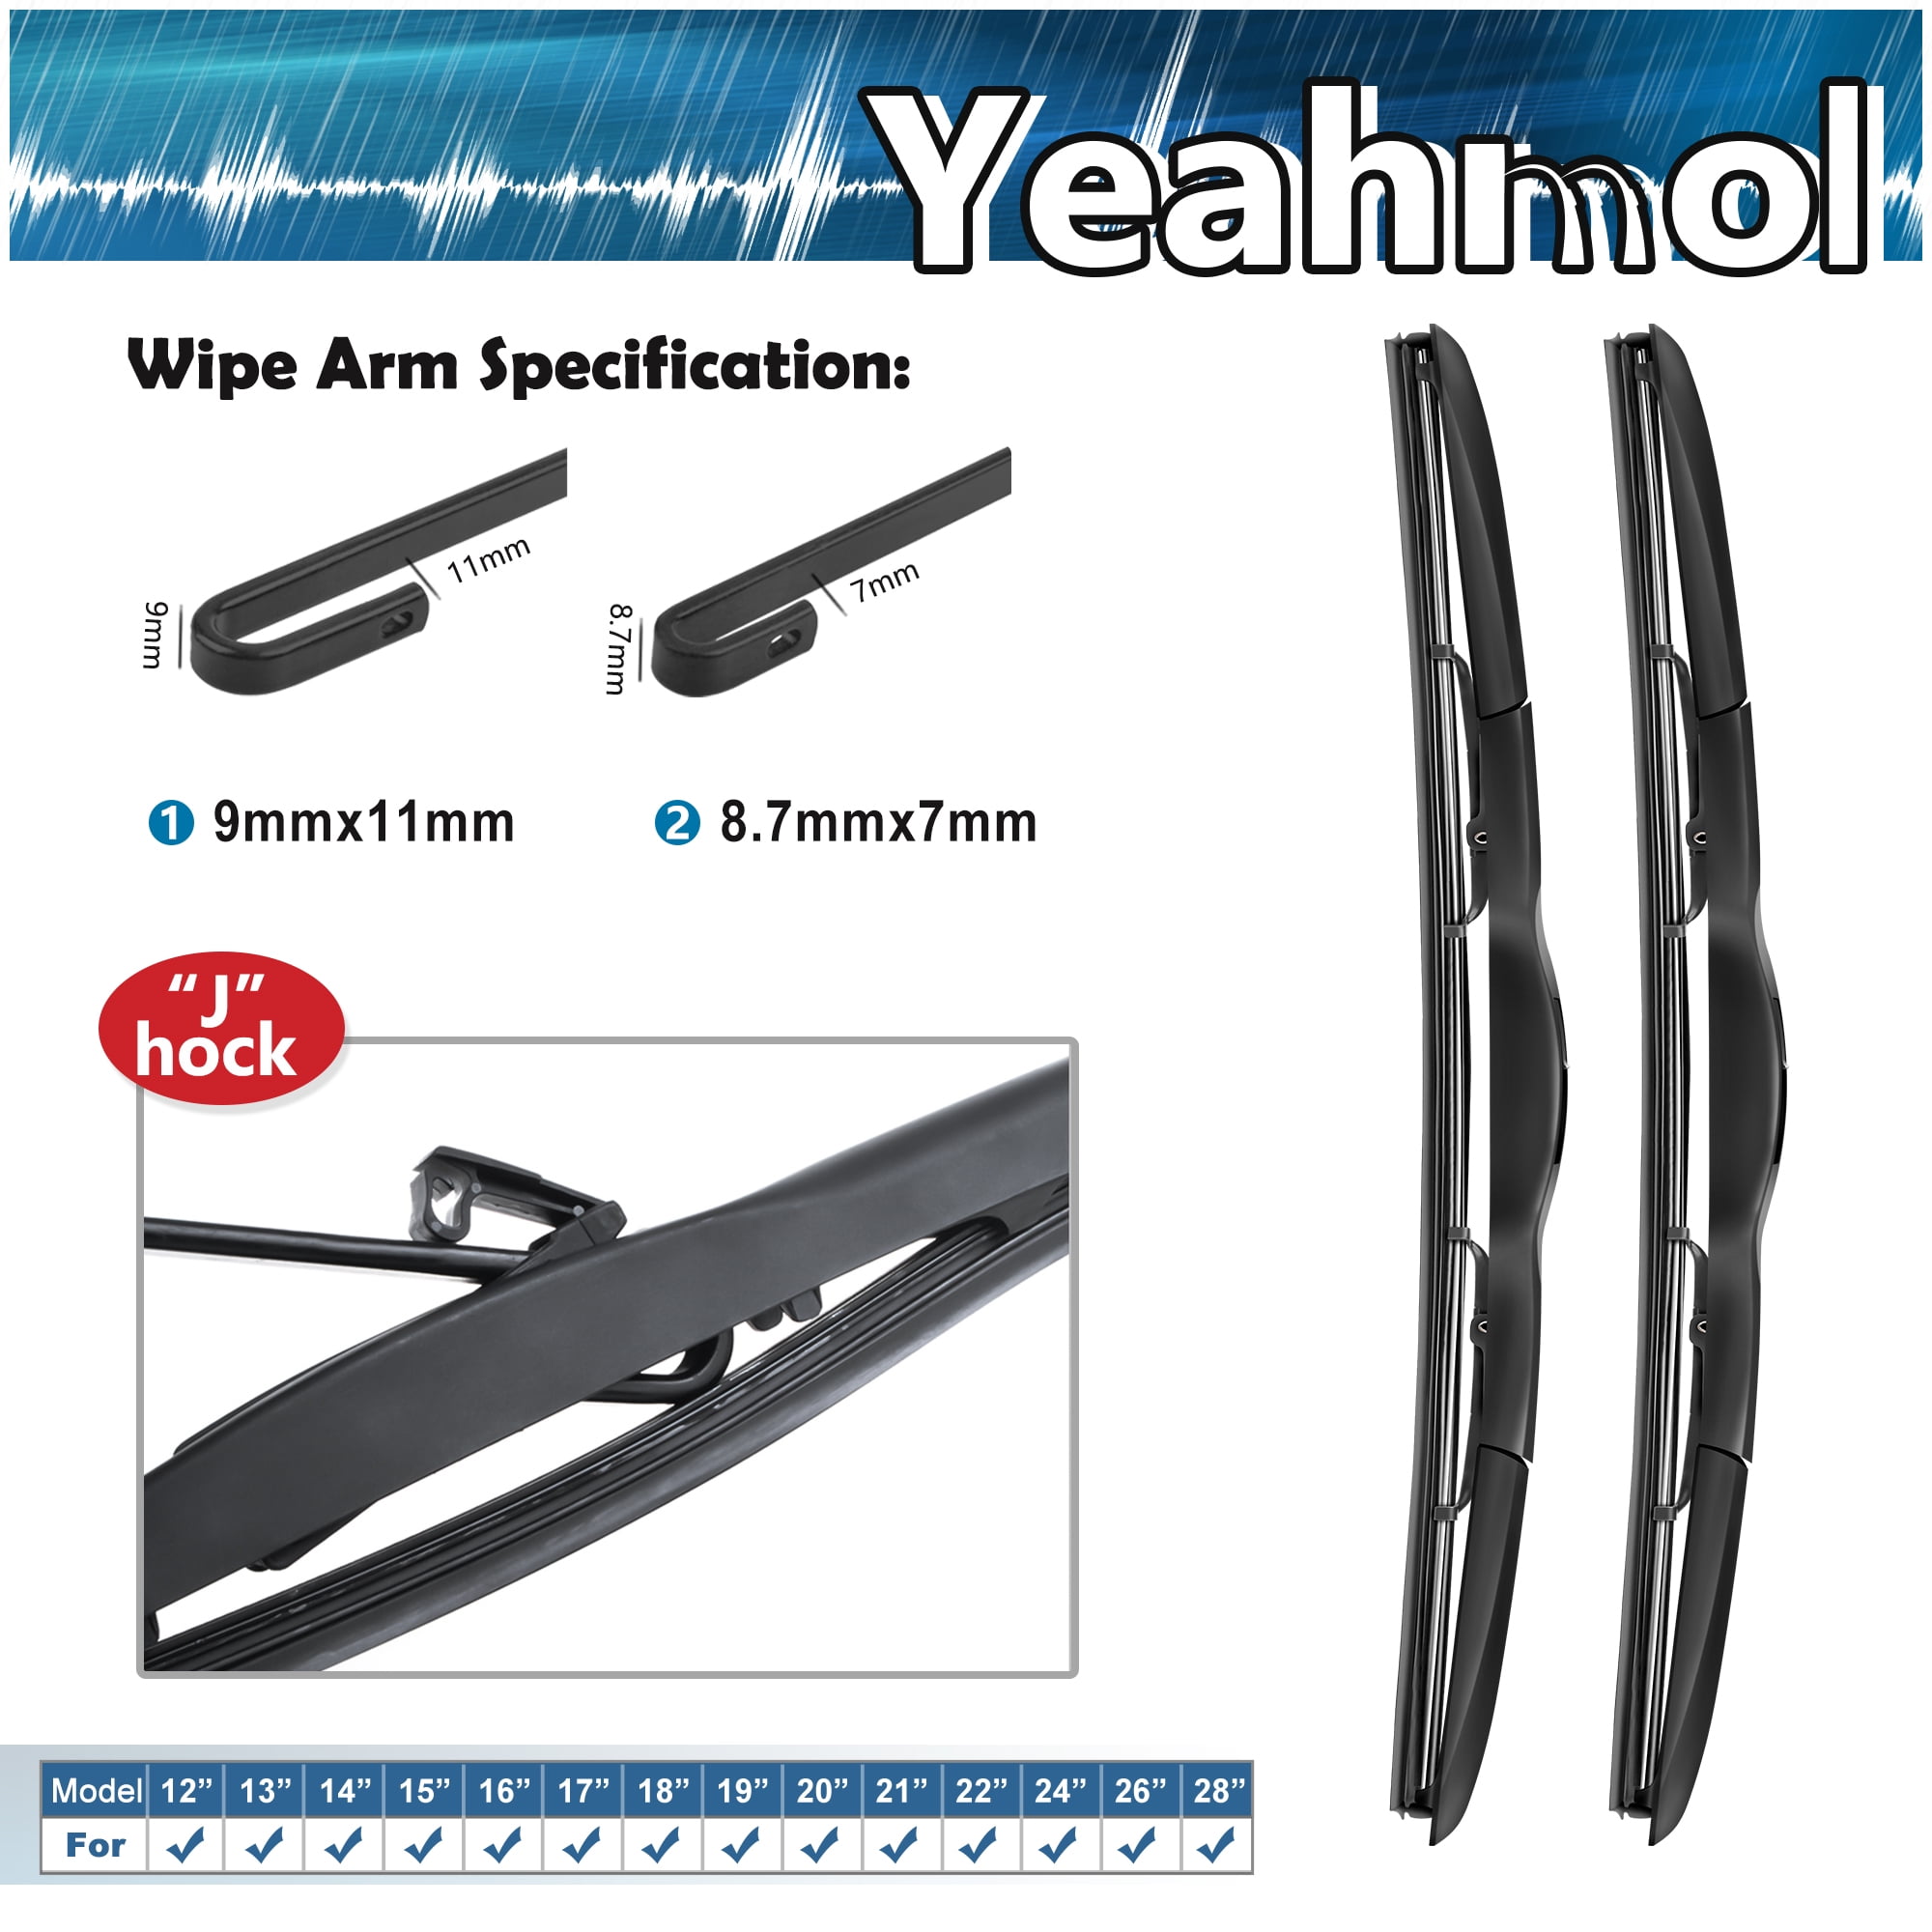 Yeahmol 14 in & 14 in Windshield Wiper Blades Fit For Jeep Wrangler 2009  14